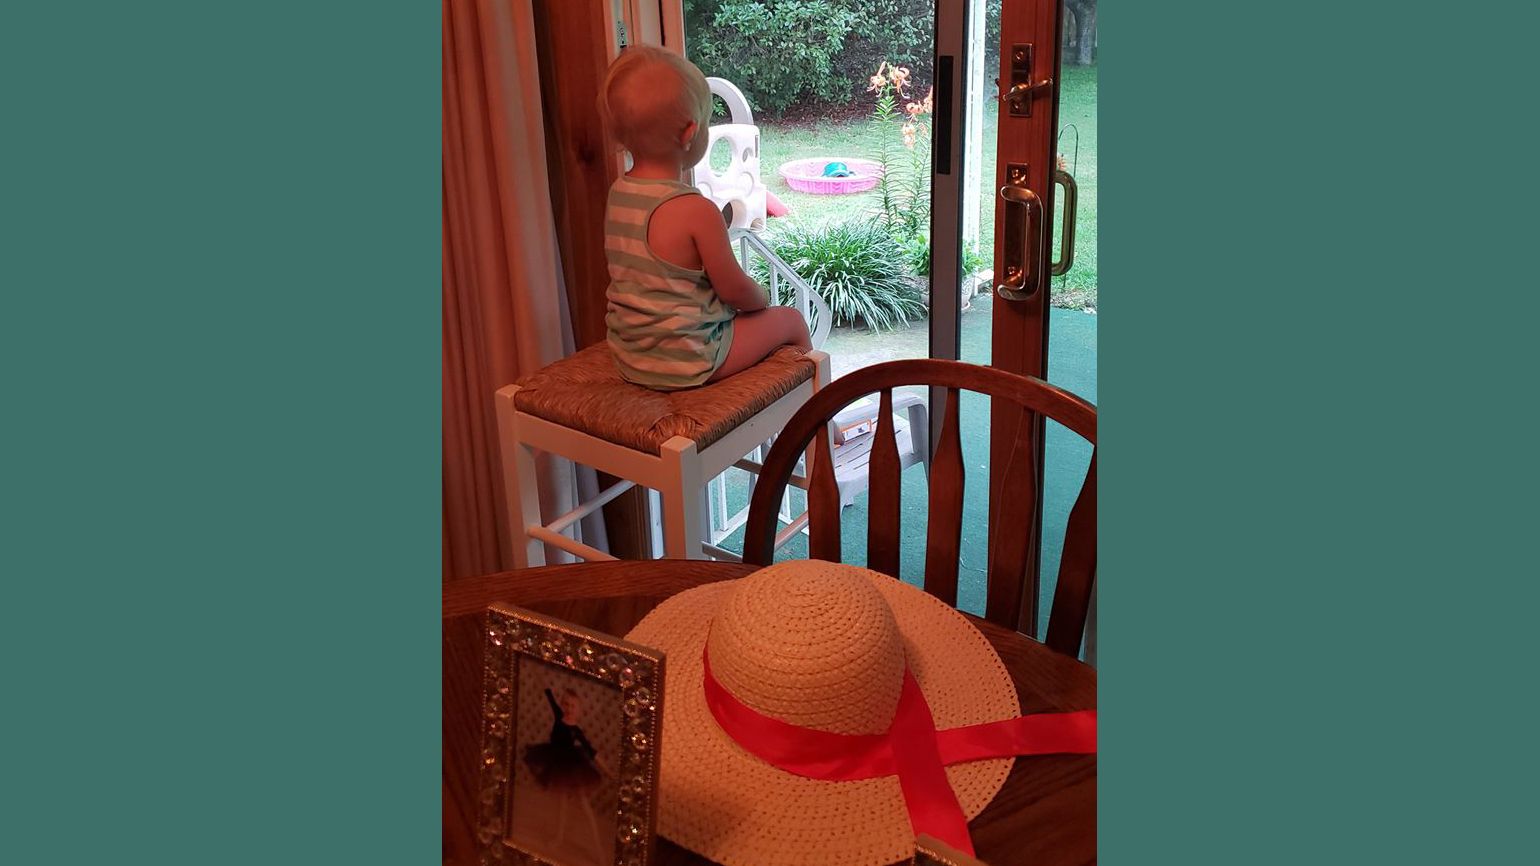 My youngest granddaughter, Anna, looks out the patio into the spring flowers.